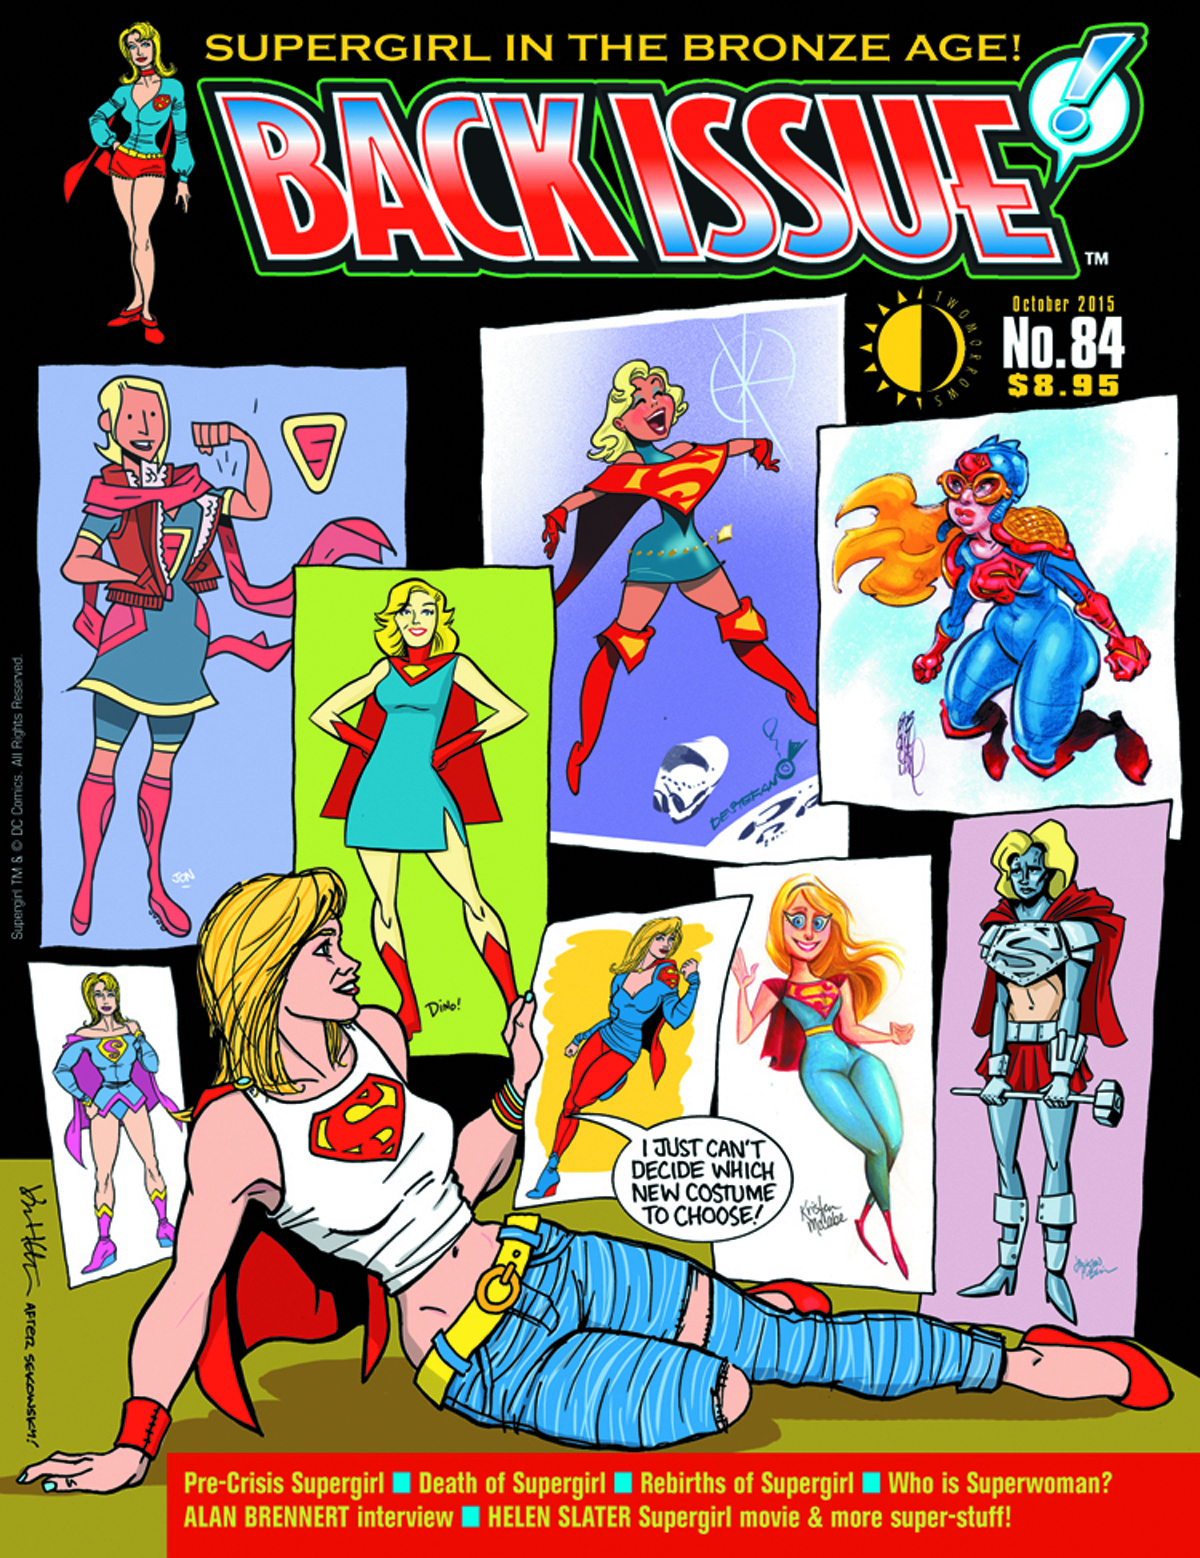 BACK ISSUE #84